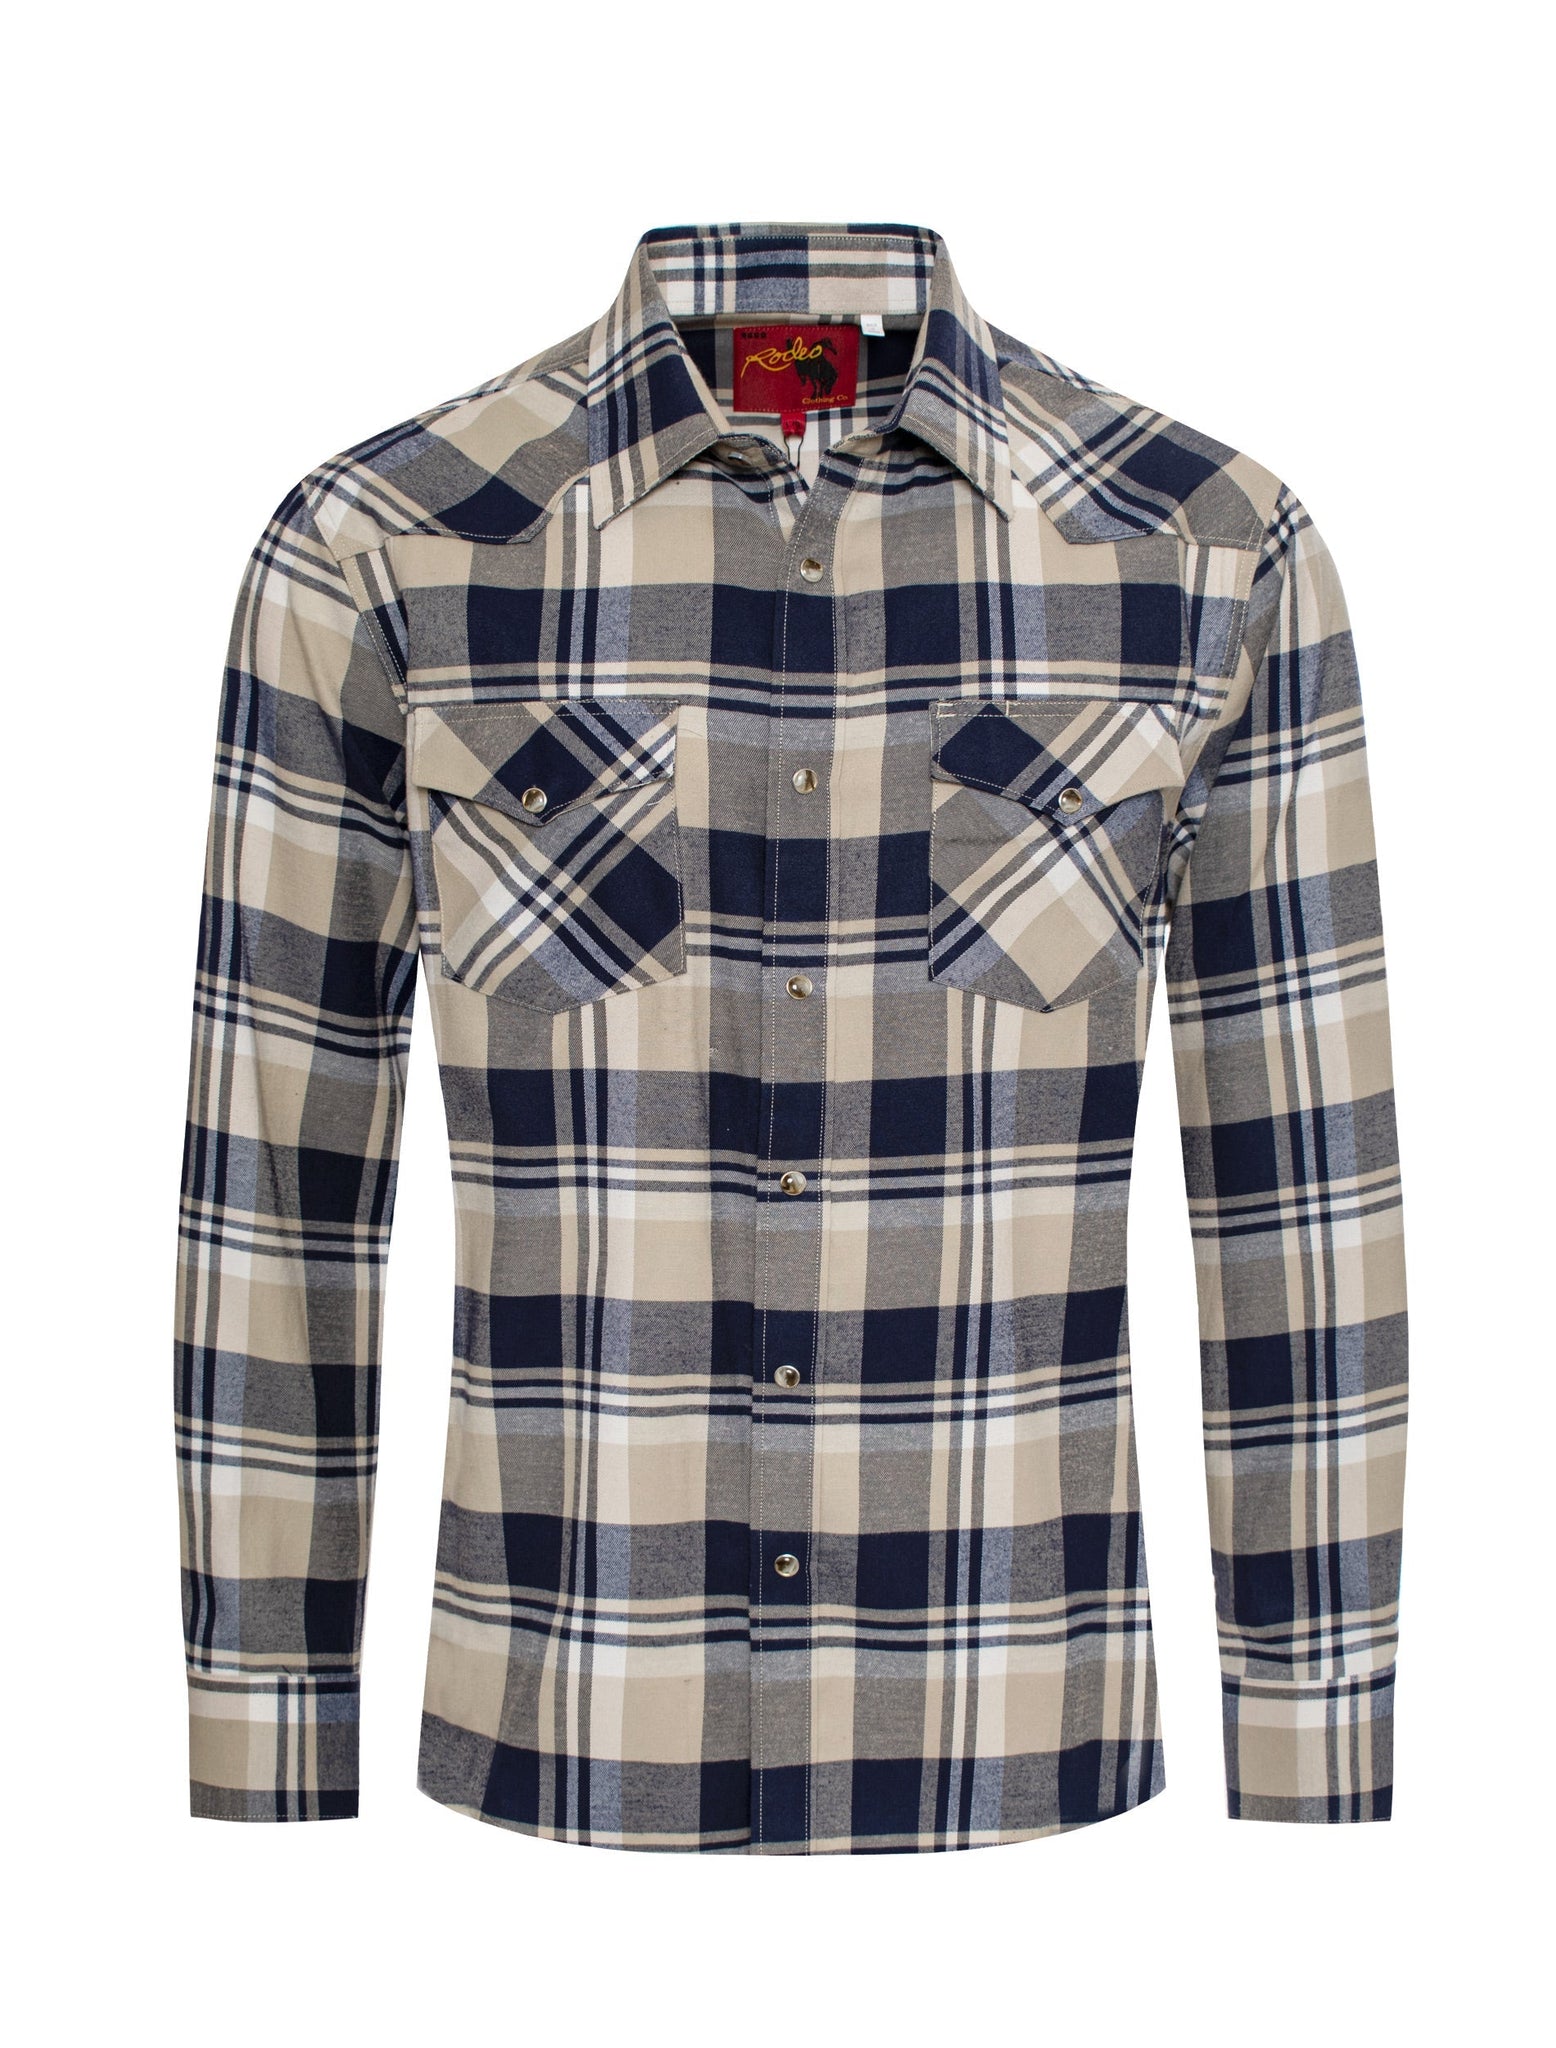 Men's Western Flannel Shirts With Snap Buttons -FLS300-307